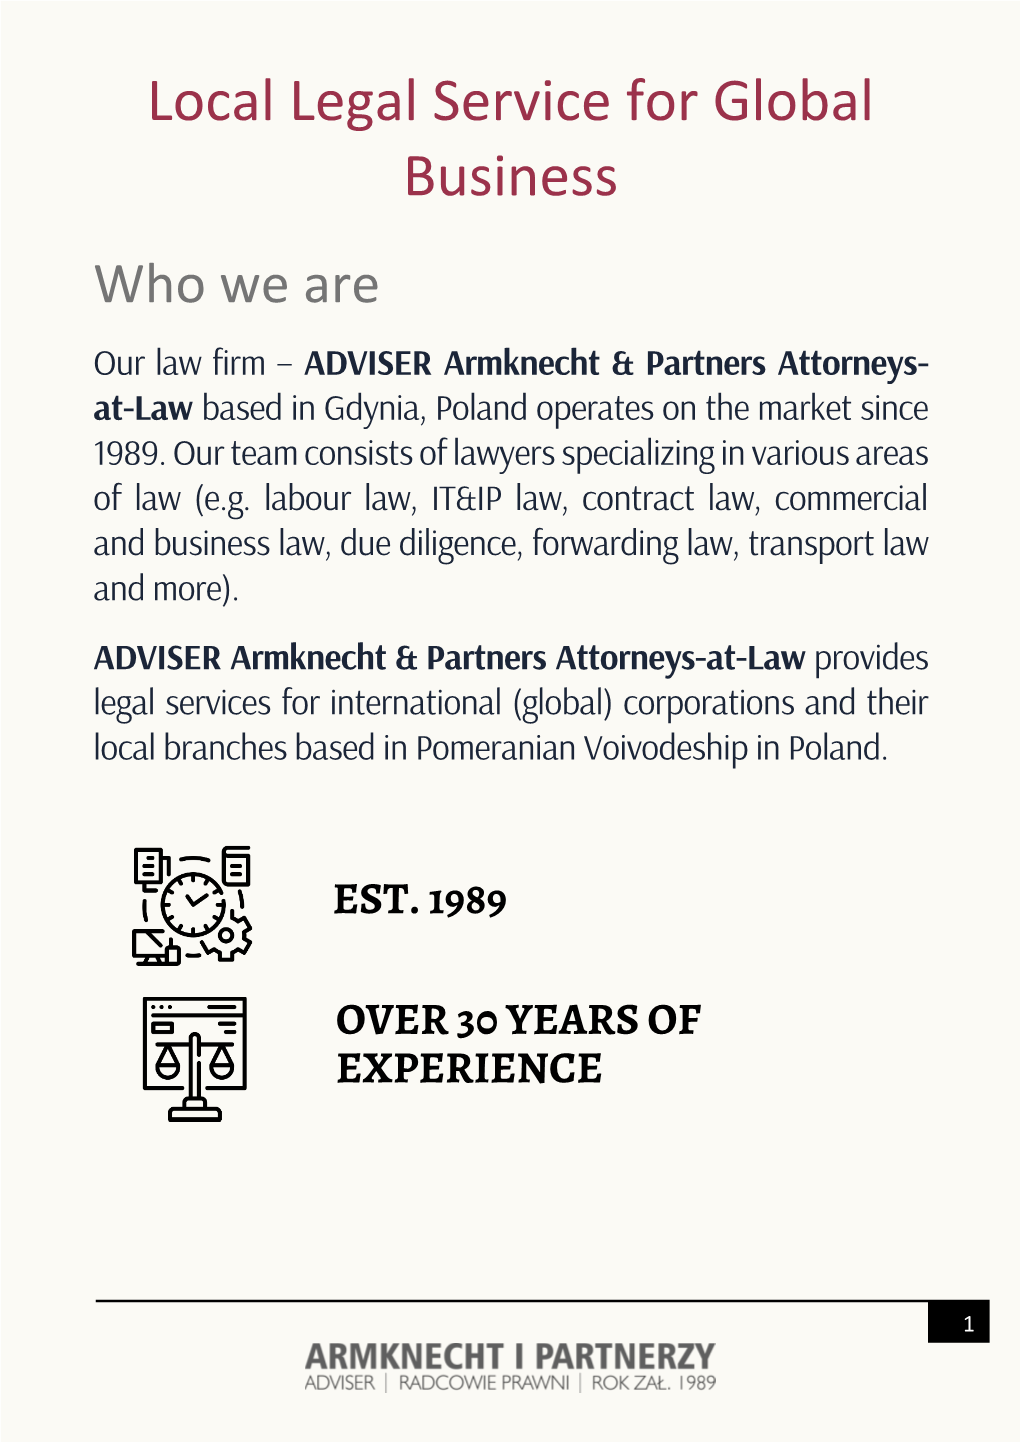 Local Legal Service for Global Business